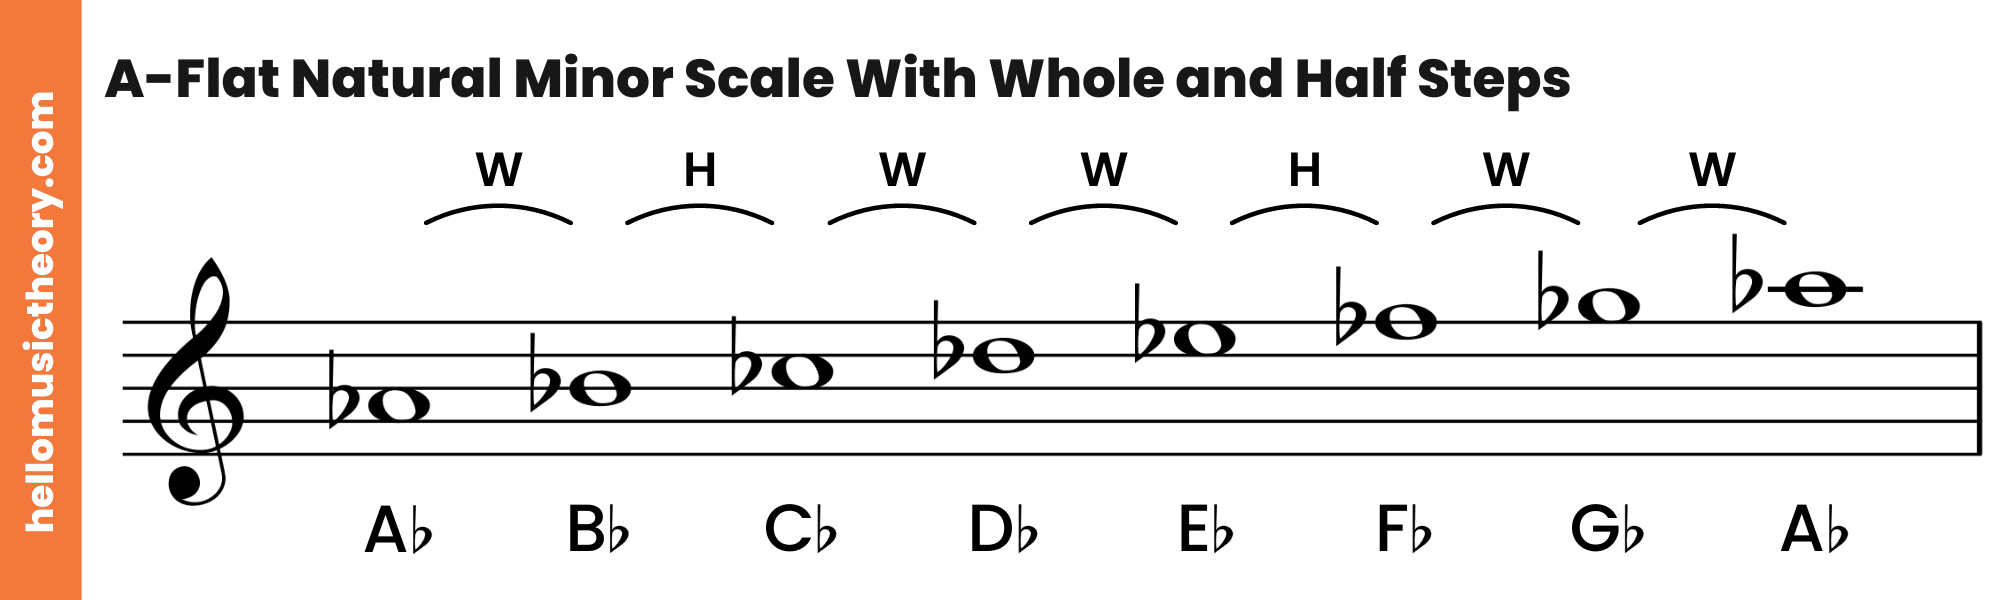 A-Flat Natural Minor Scale Treble Clef Ascending With Whole and Half Steps